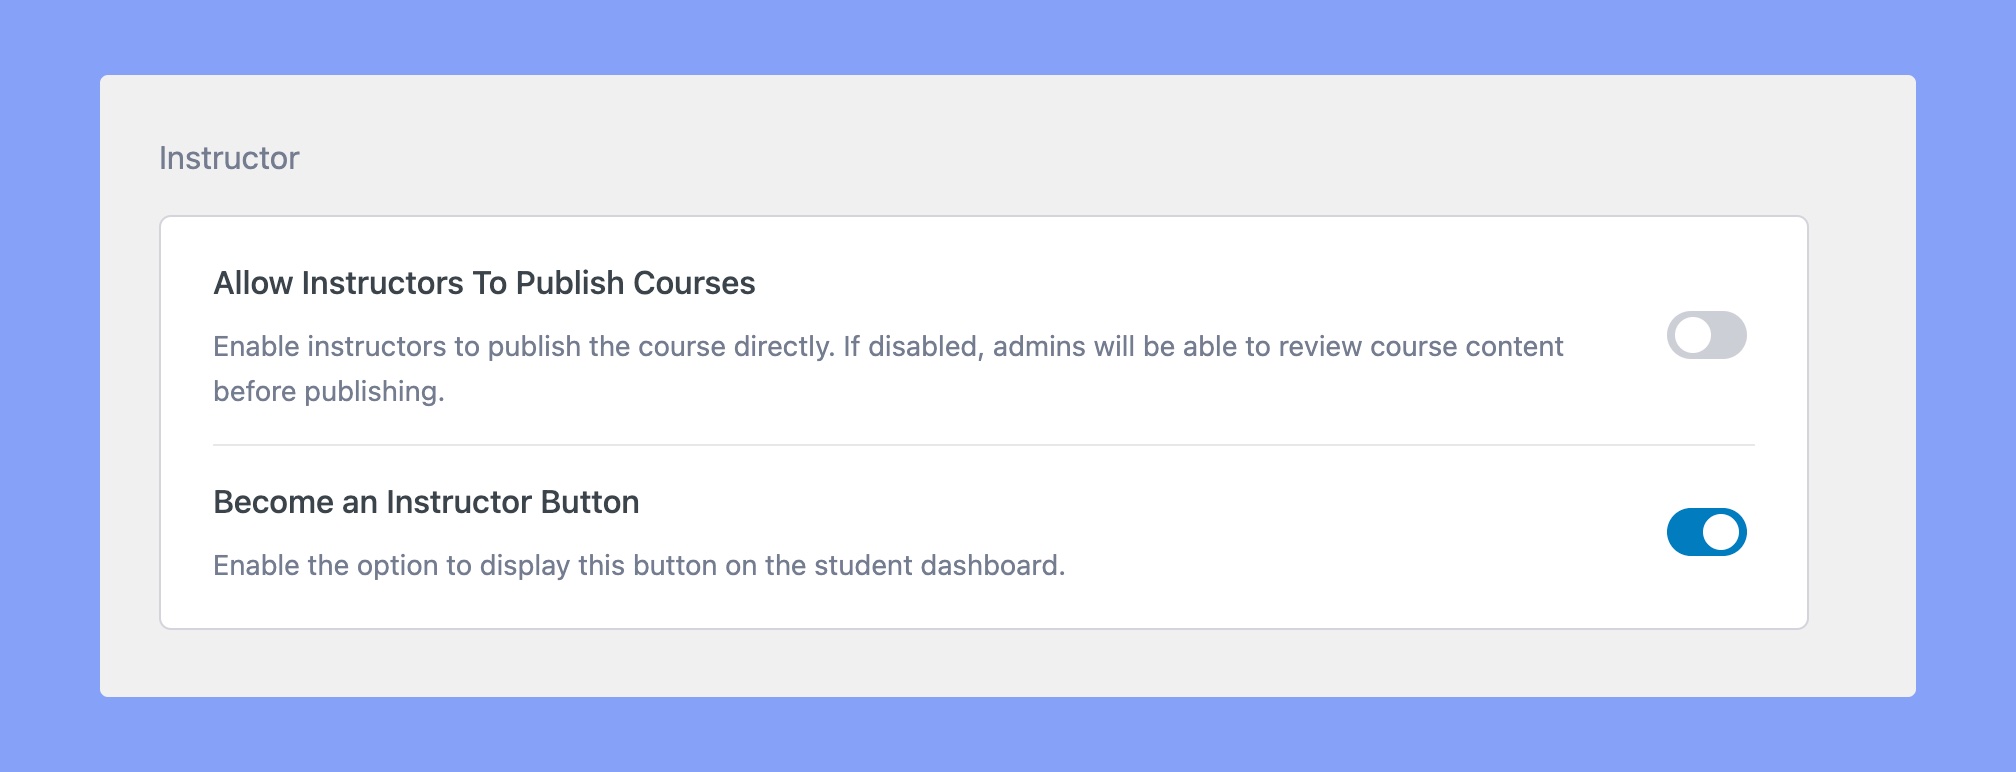 Become an Instructor Button